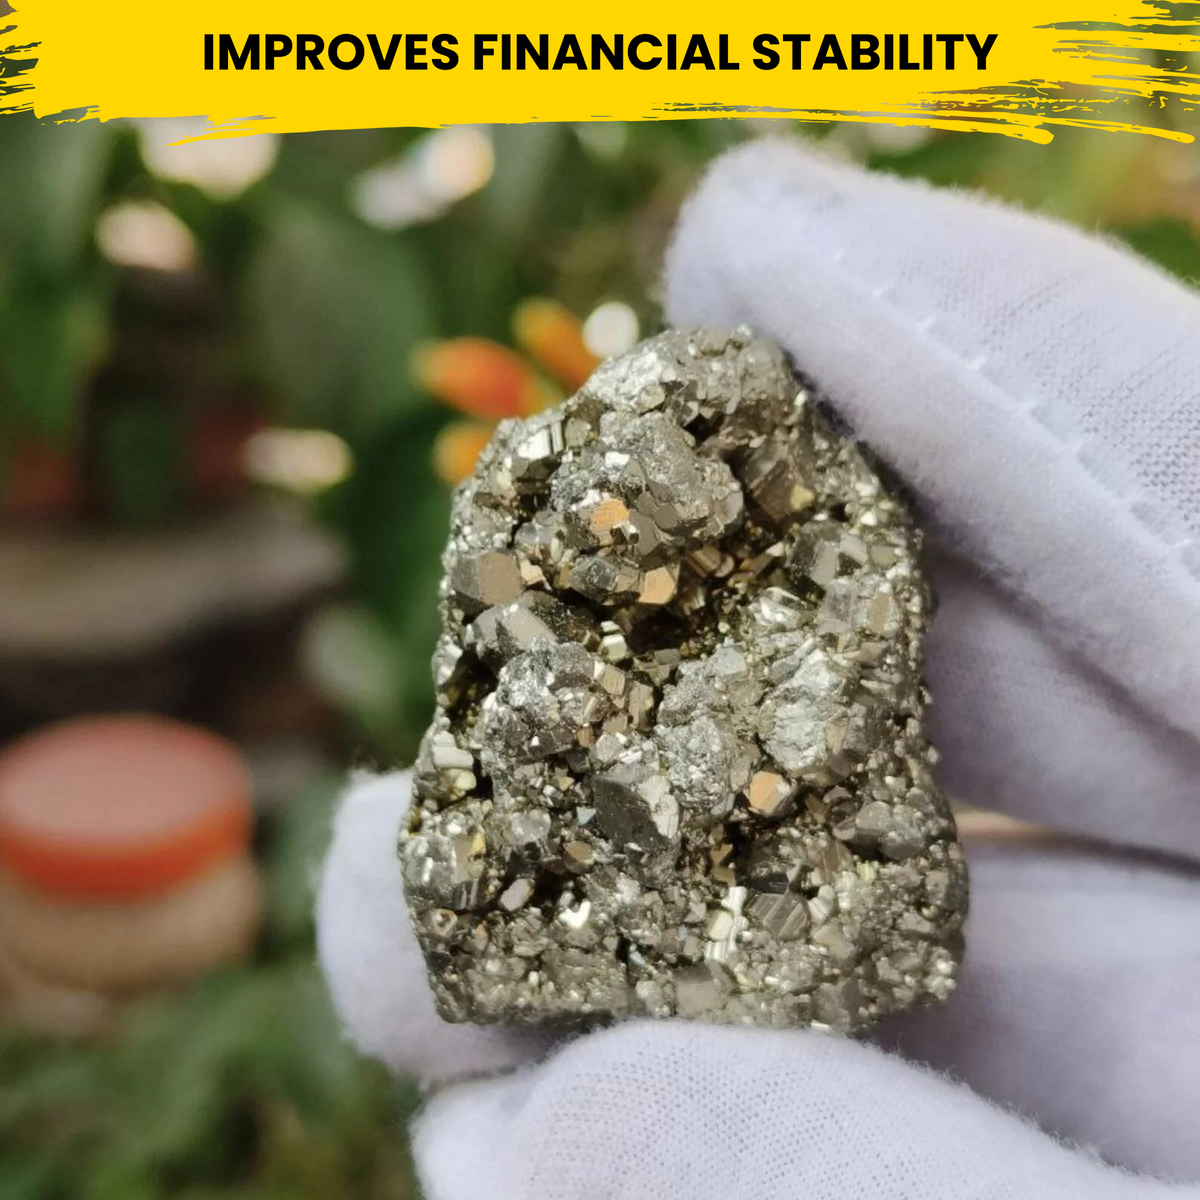 Certified Nature Pyrite Cluster (Money Attraction Stone)